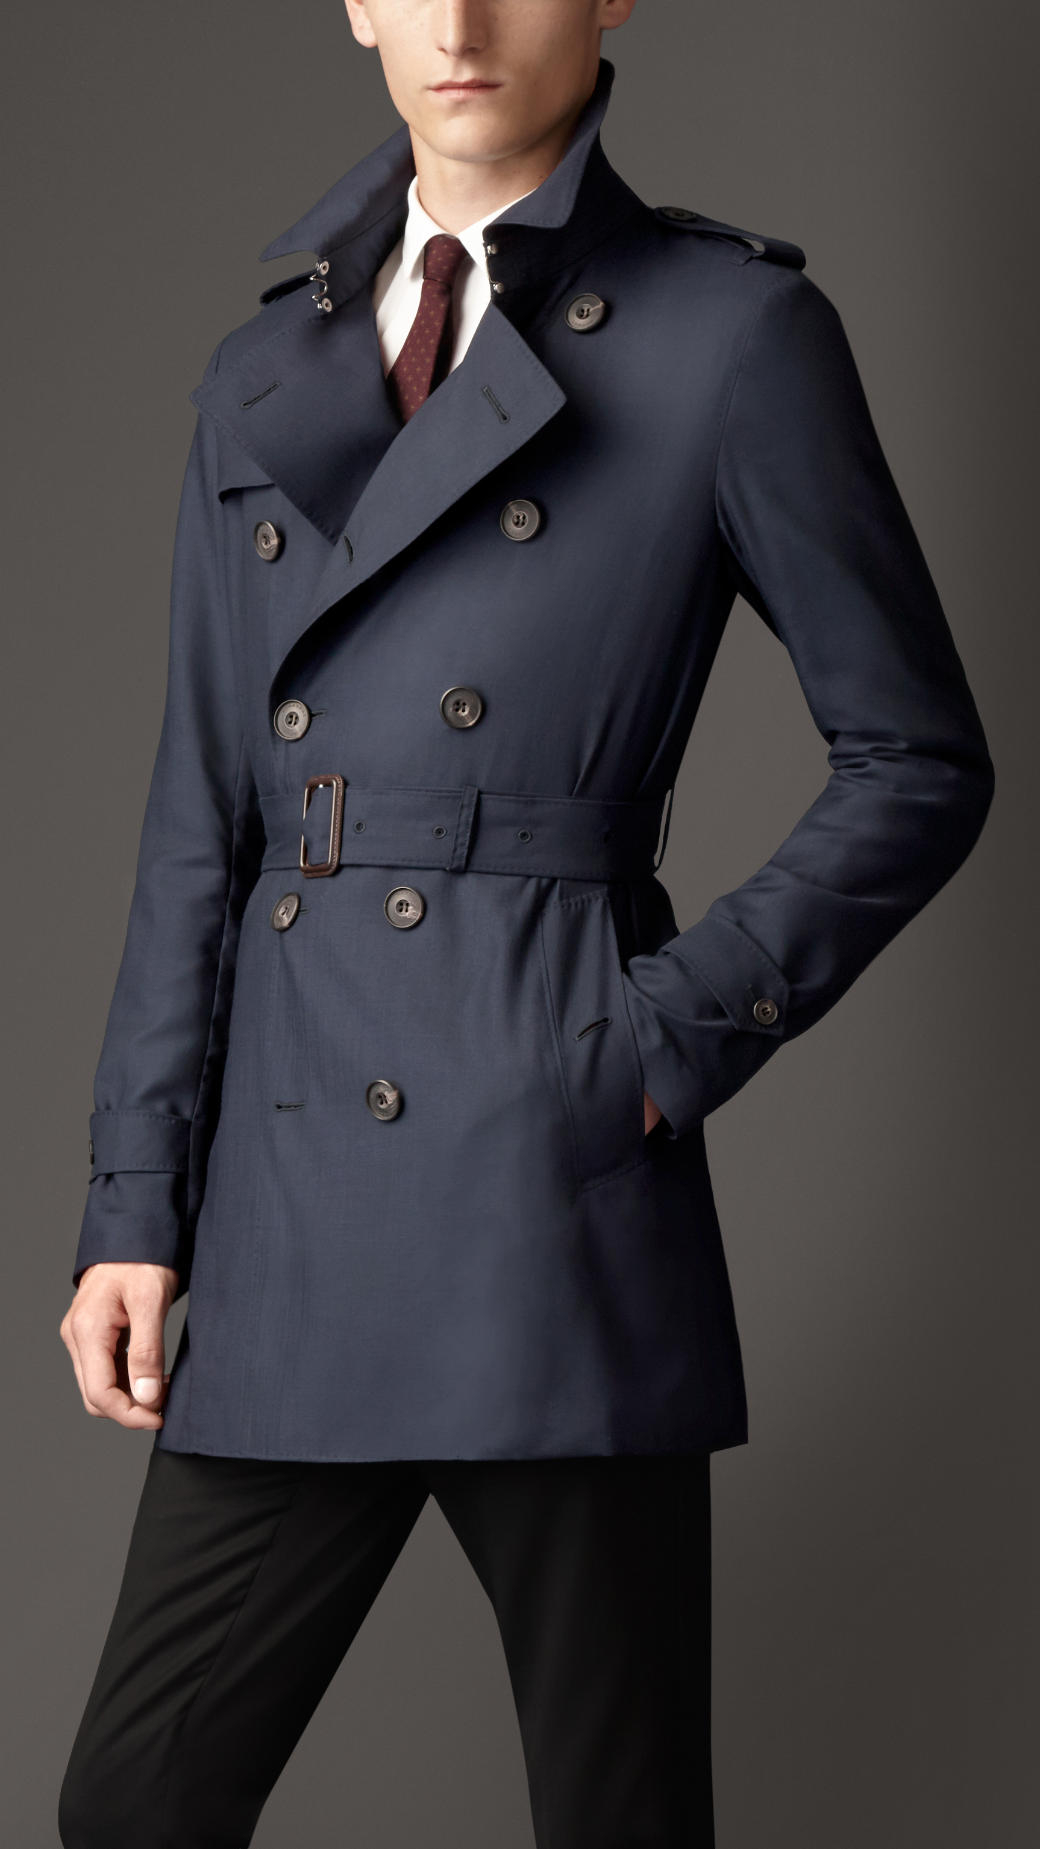 Lyst - Burberry Mid Length Light Weight Cashmere Trench Coat in Blue ...